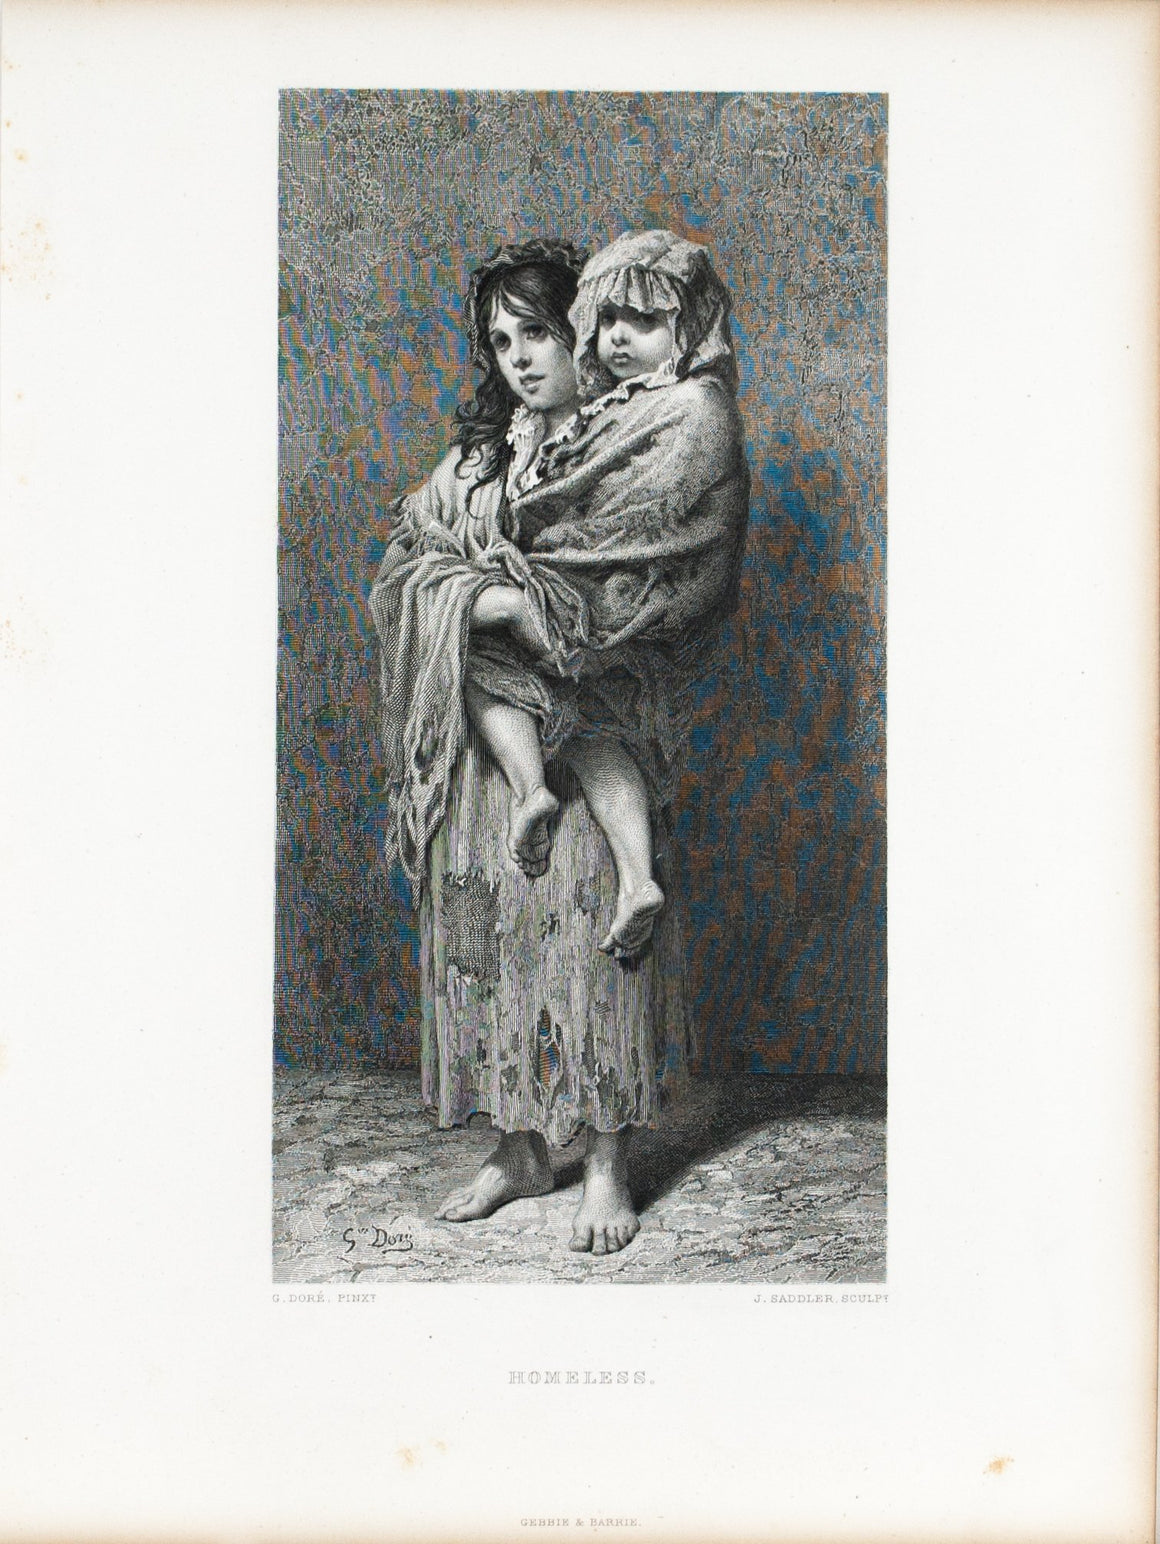 Homeless Poor French Children in Rags c. 1880 Engraved Print after Gustave Dore